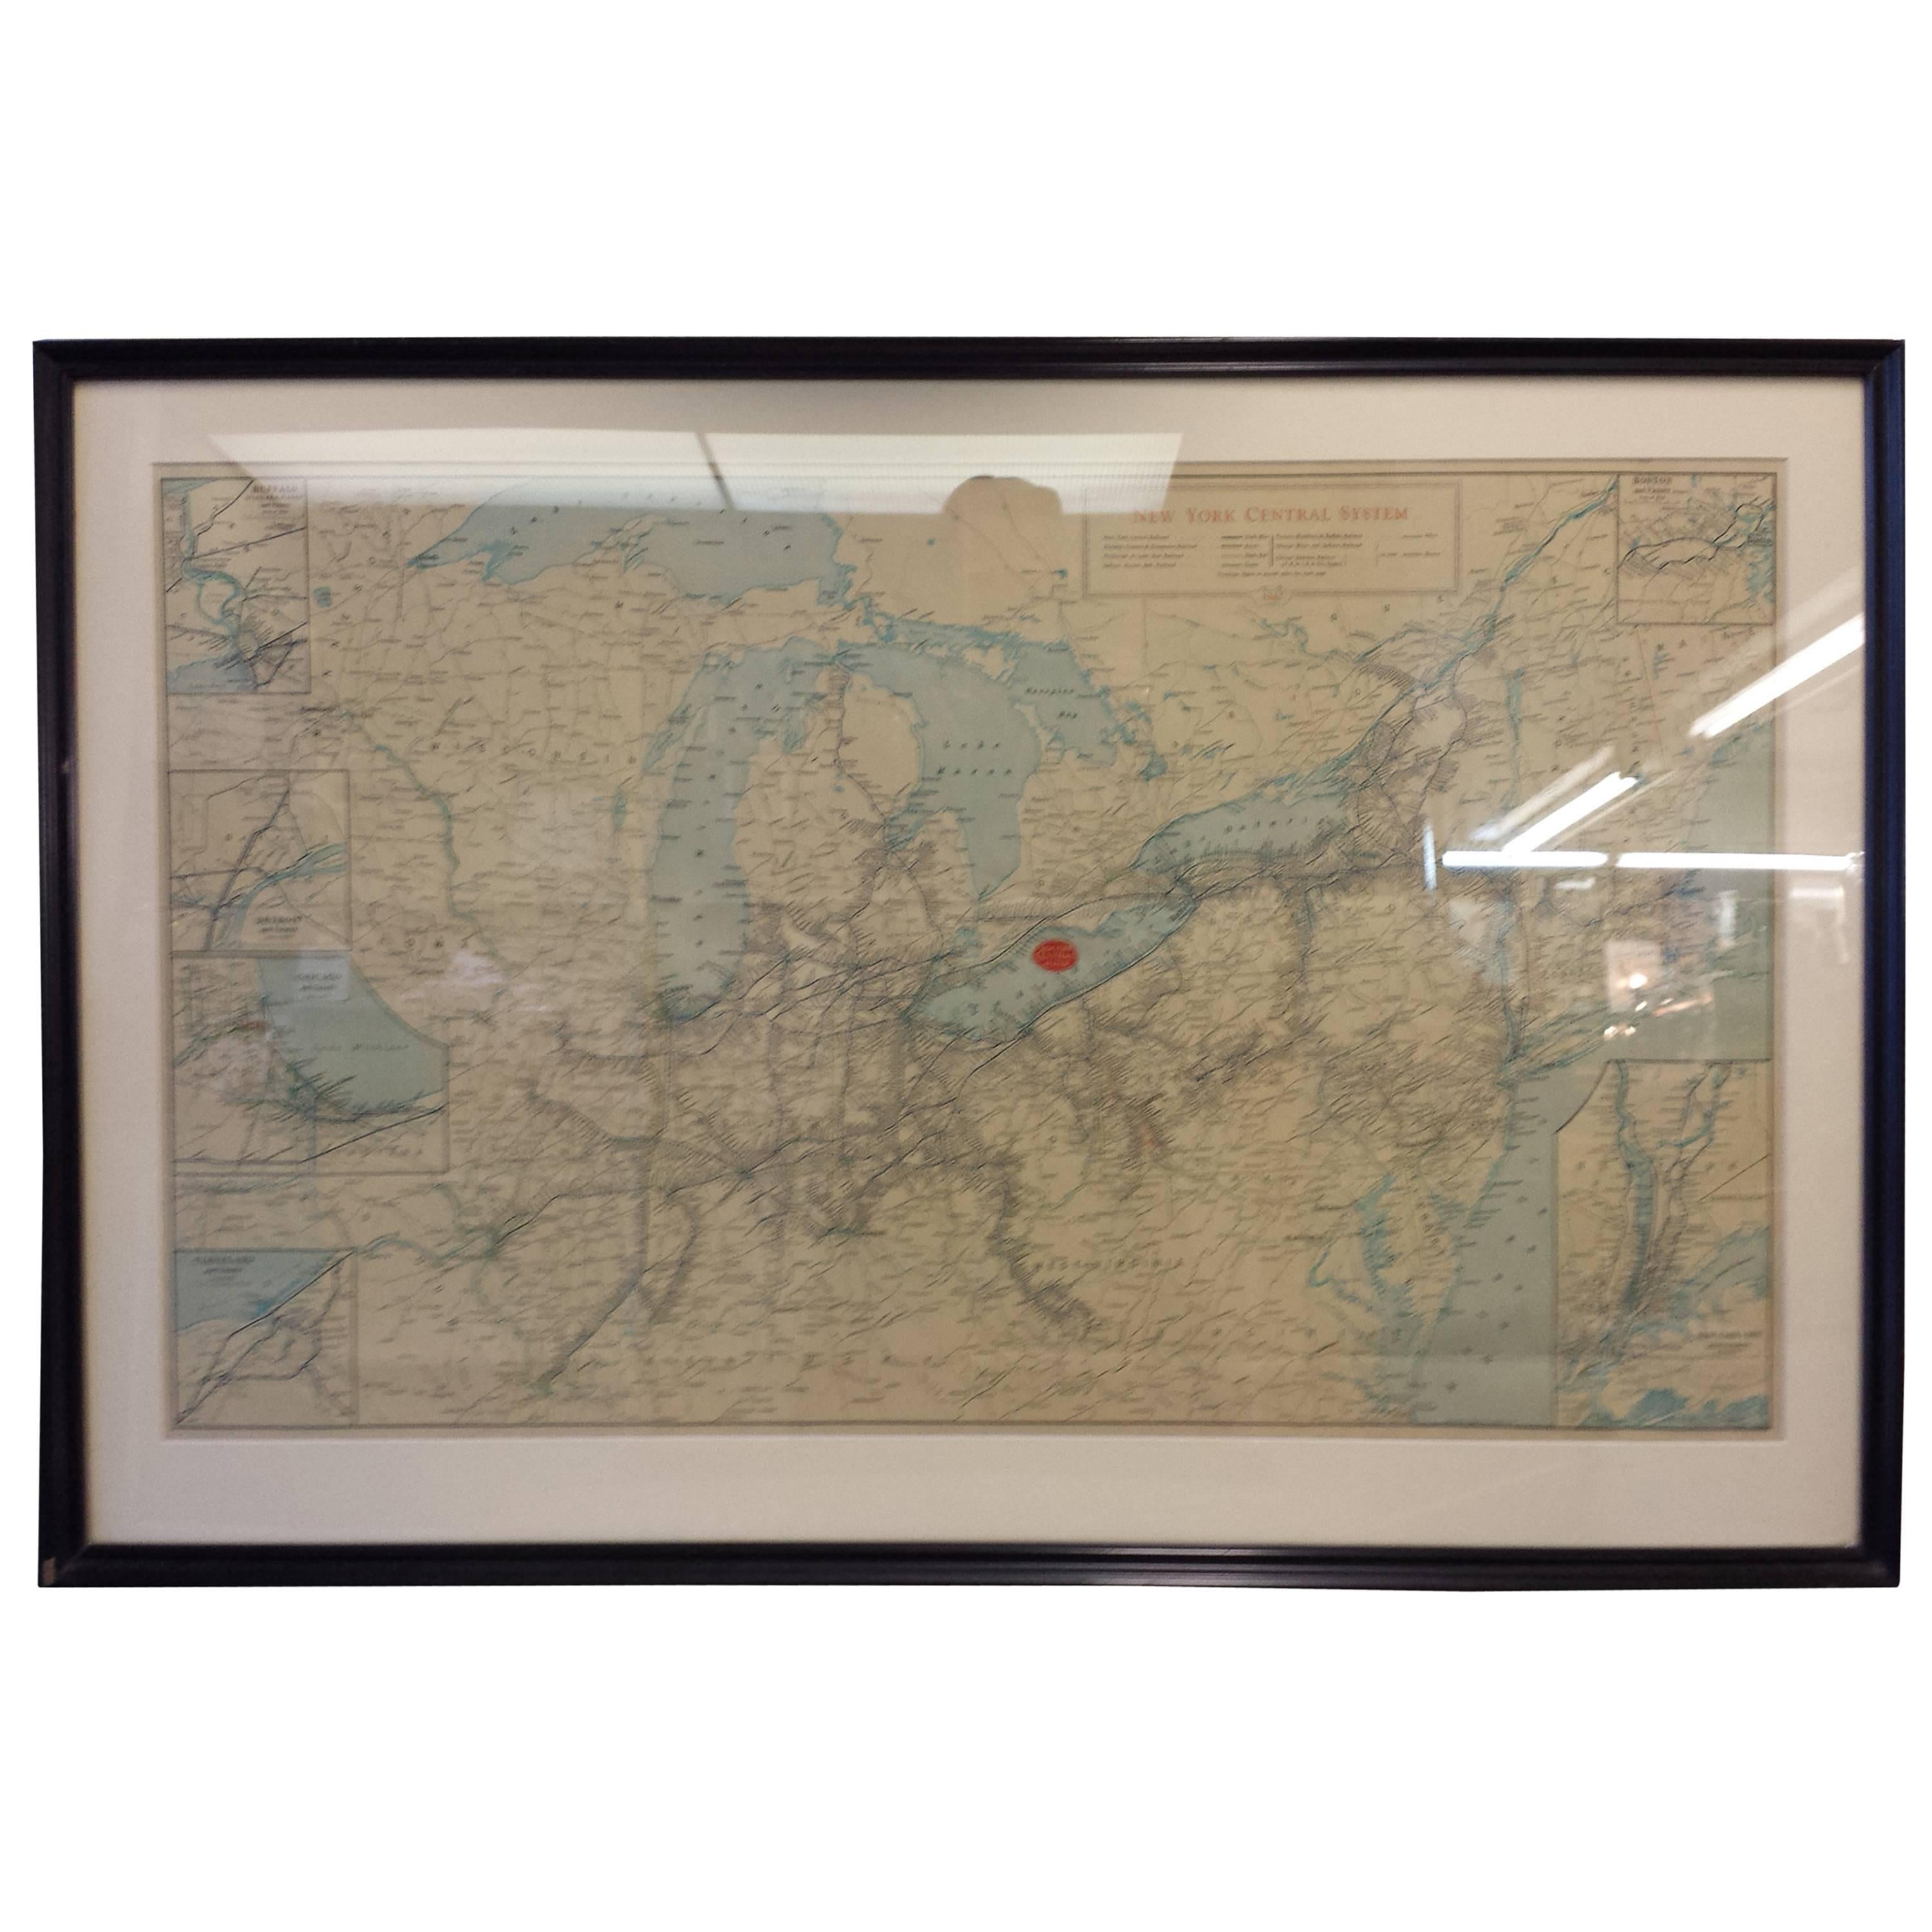 Framed New York Central Railway Map Original from 1943 with Railway Label